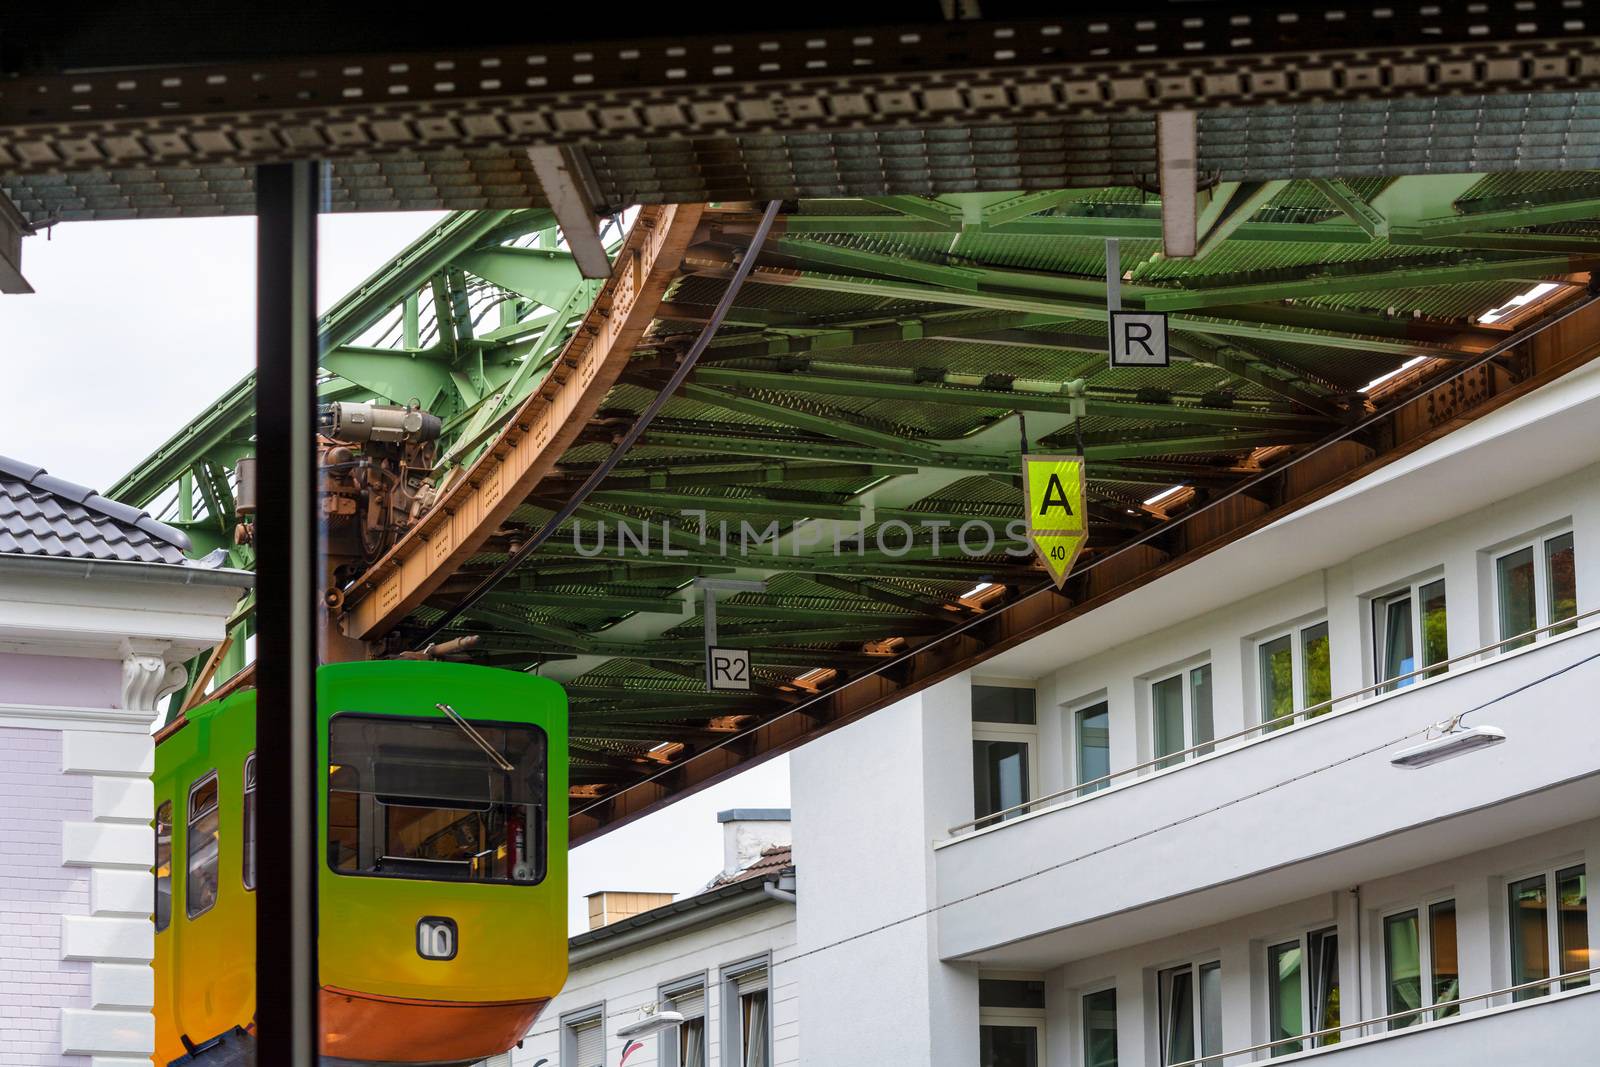 The Suspension Railway in Wuppertal is an elevated railway  for public passenger transport.